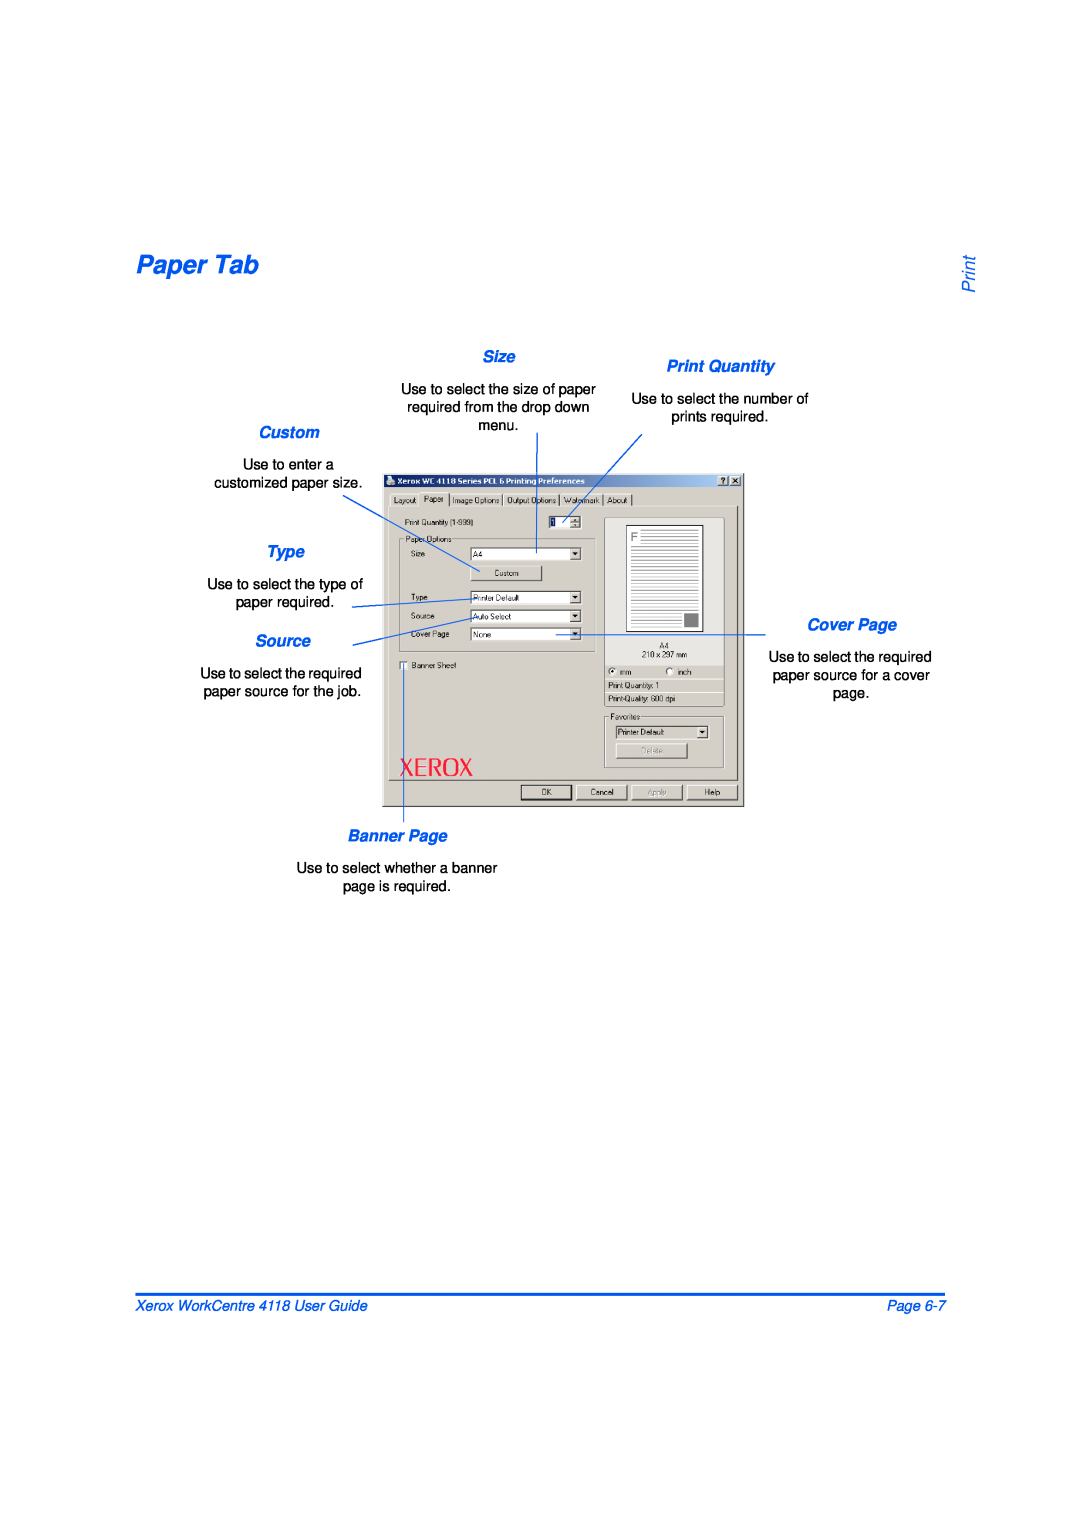 Xerox 32N00467 Paper Tab, Print, menu, Use to select whether a banner page is required, Xerox WorkCentre 4118 User Guide 